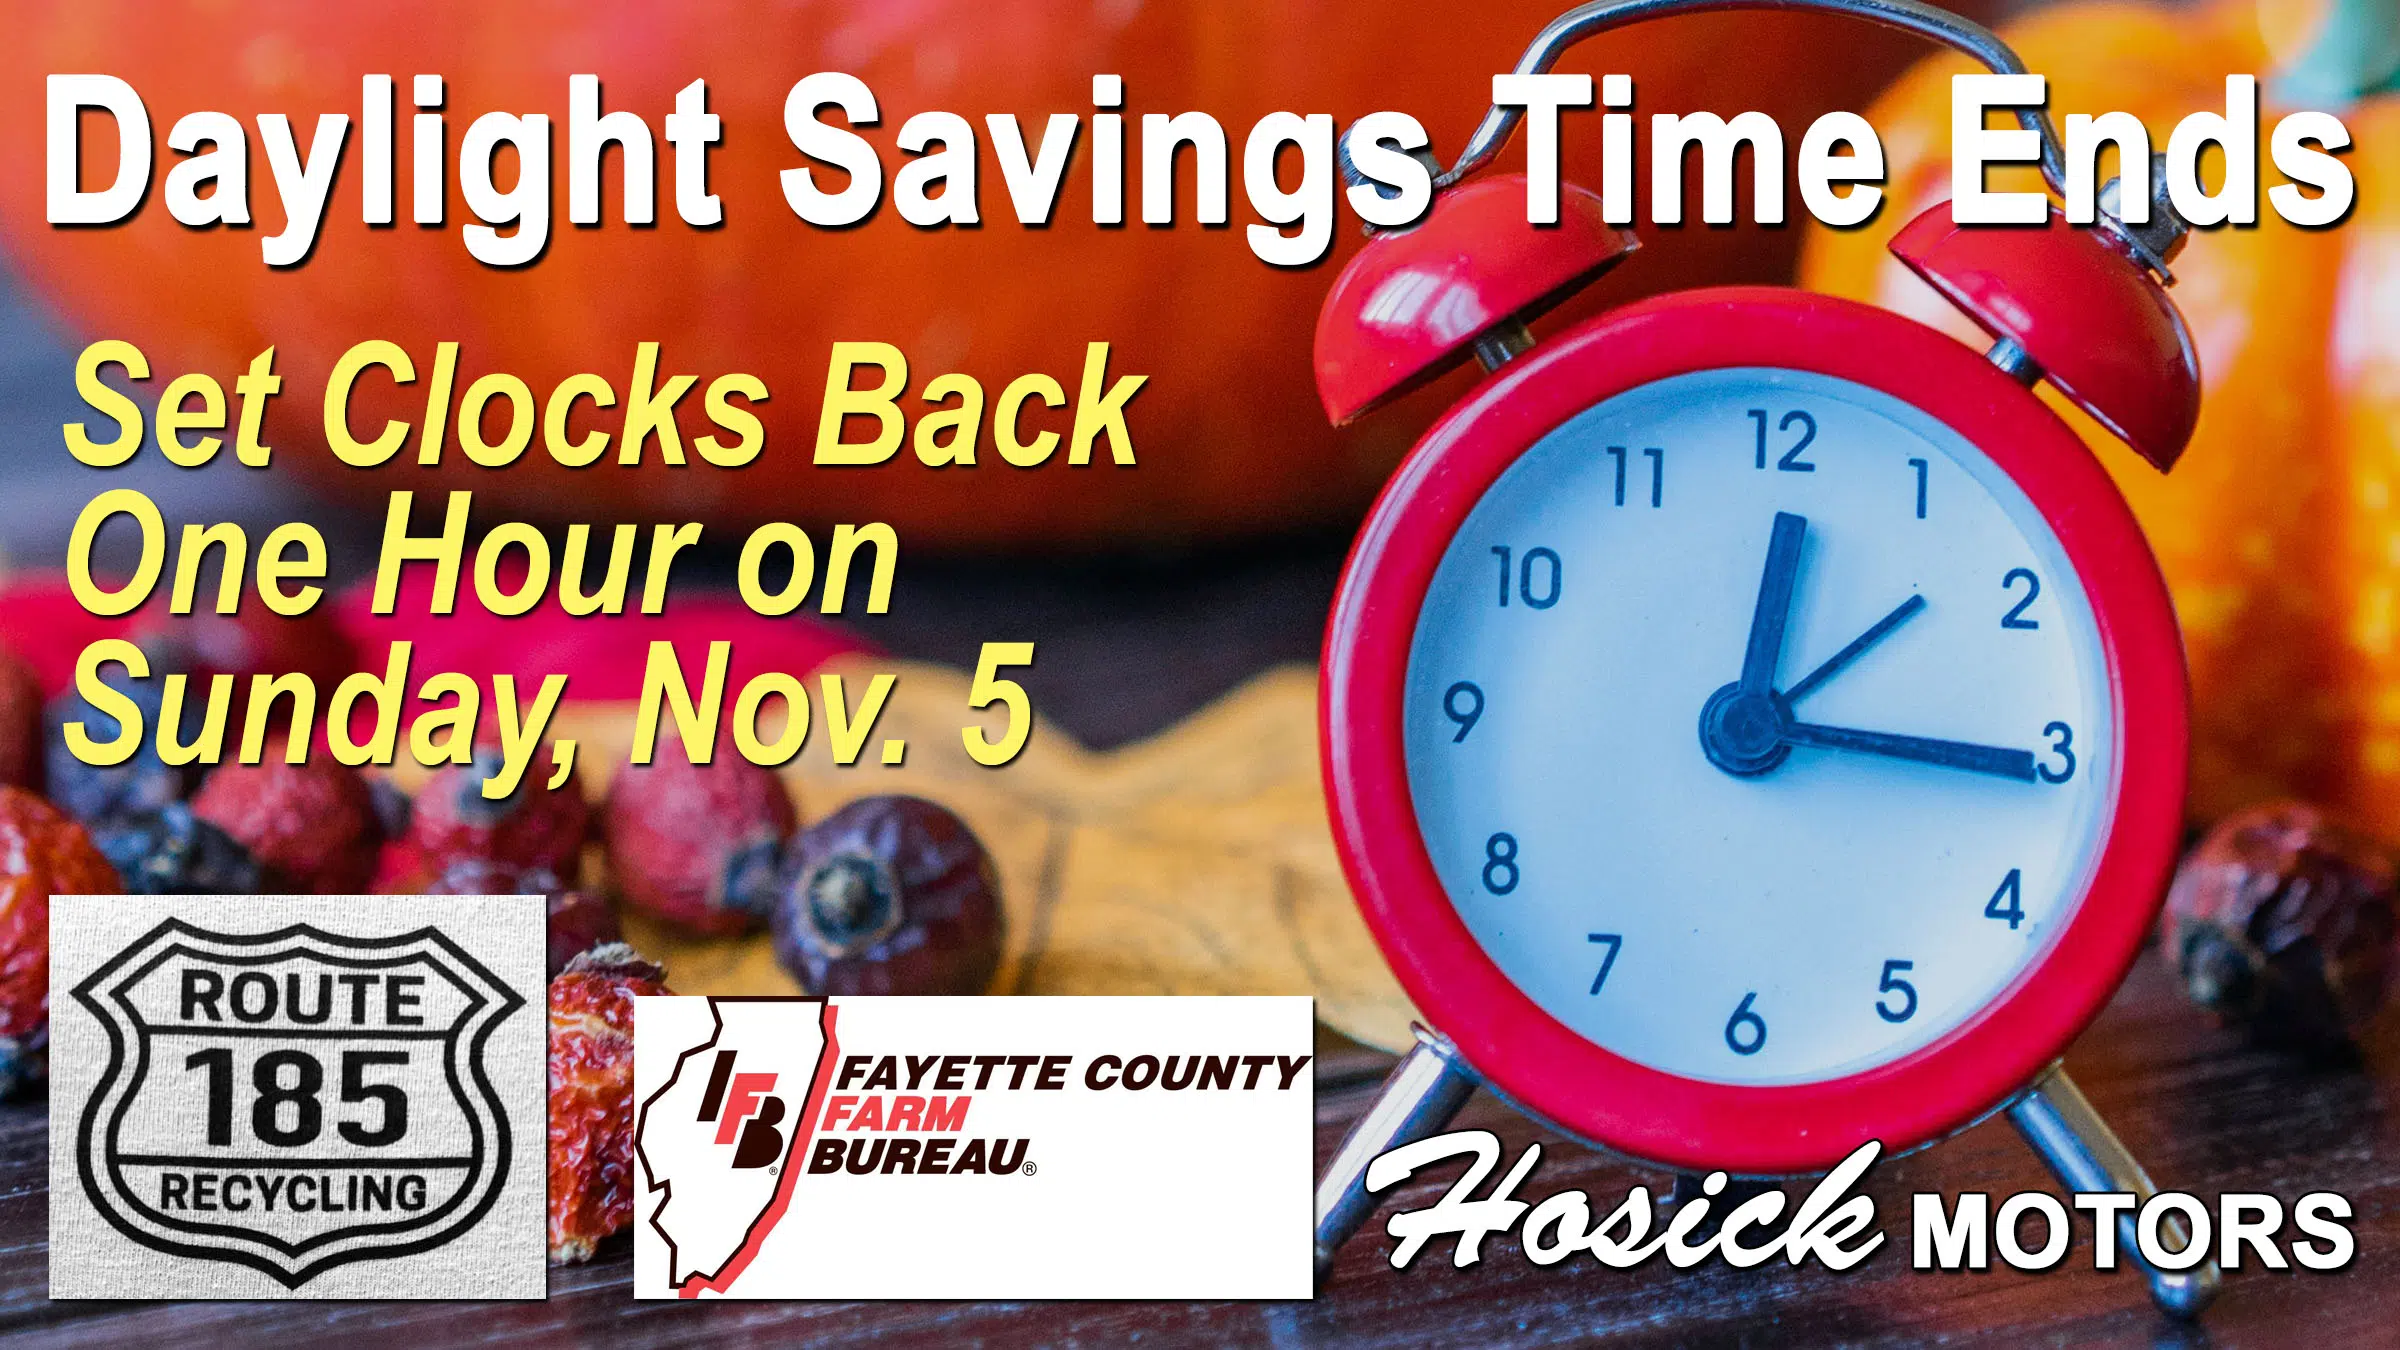 Daylight Saving Time Ends Tonight---Remember to "Fall Back" One Hour